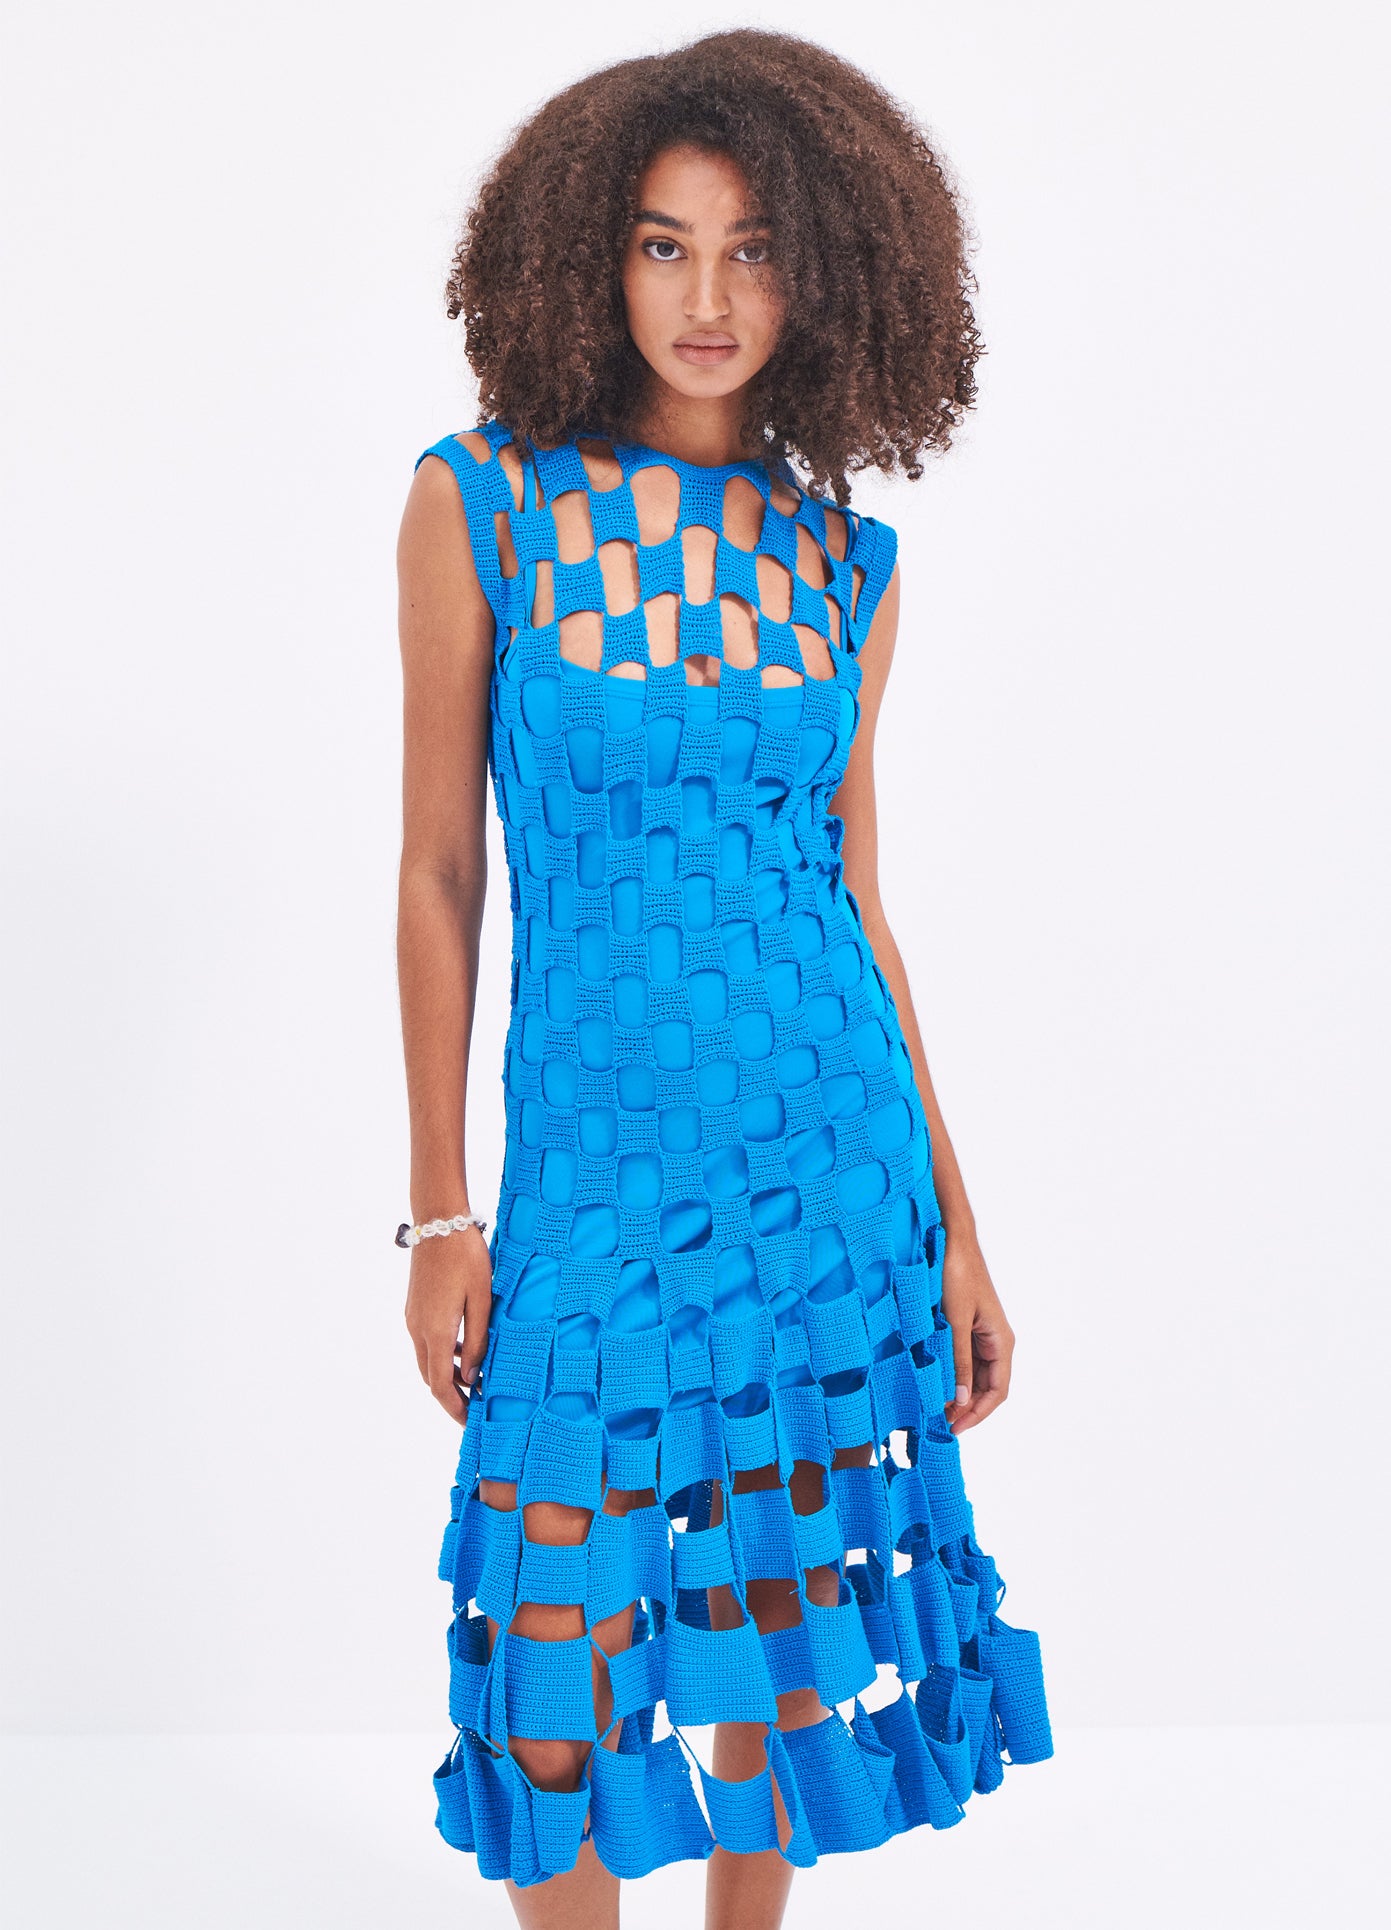 MONSE Square Crochet Dress in Blue on model front detail view